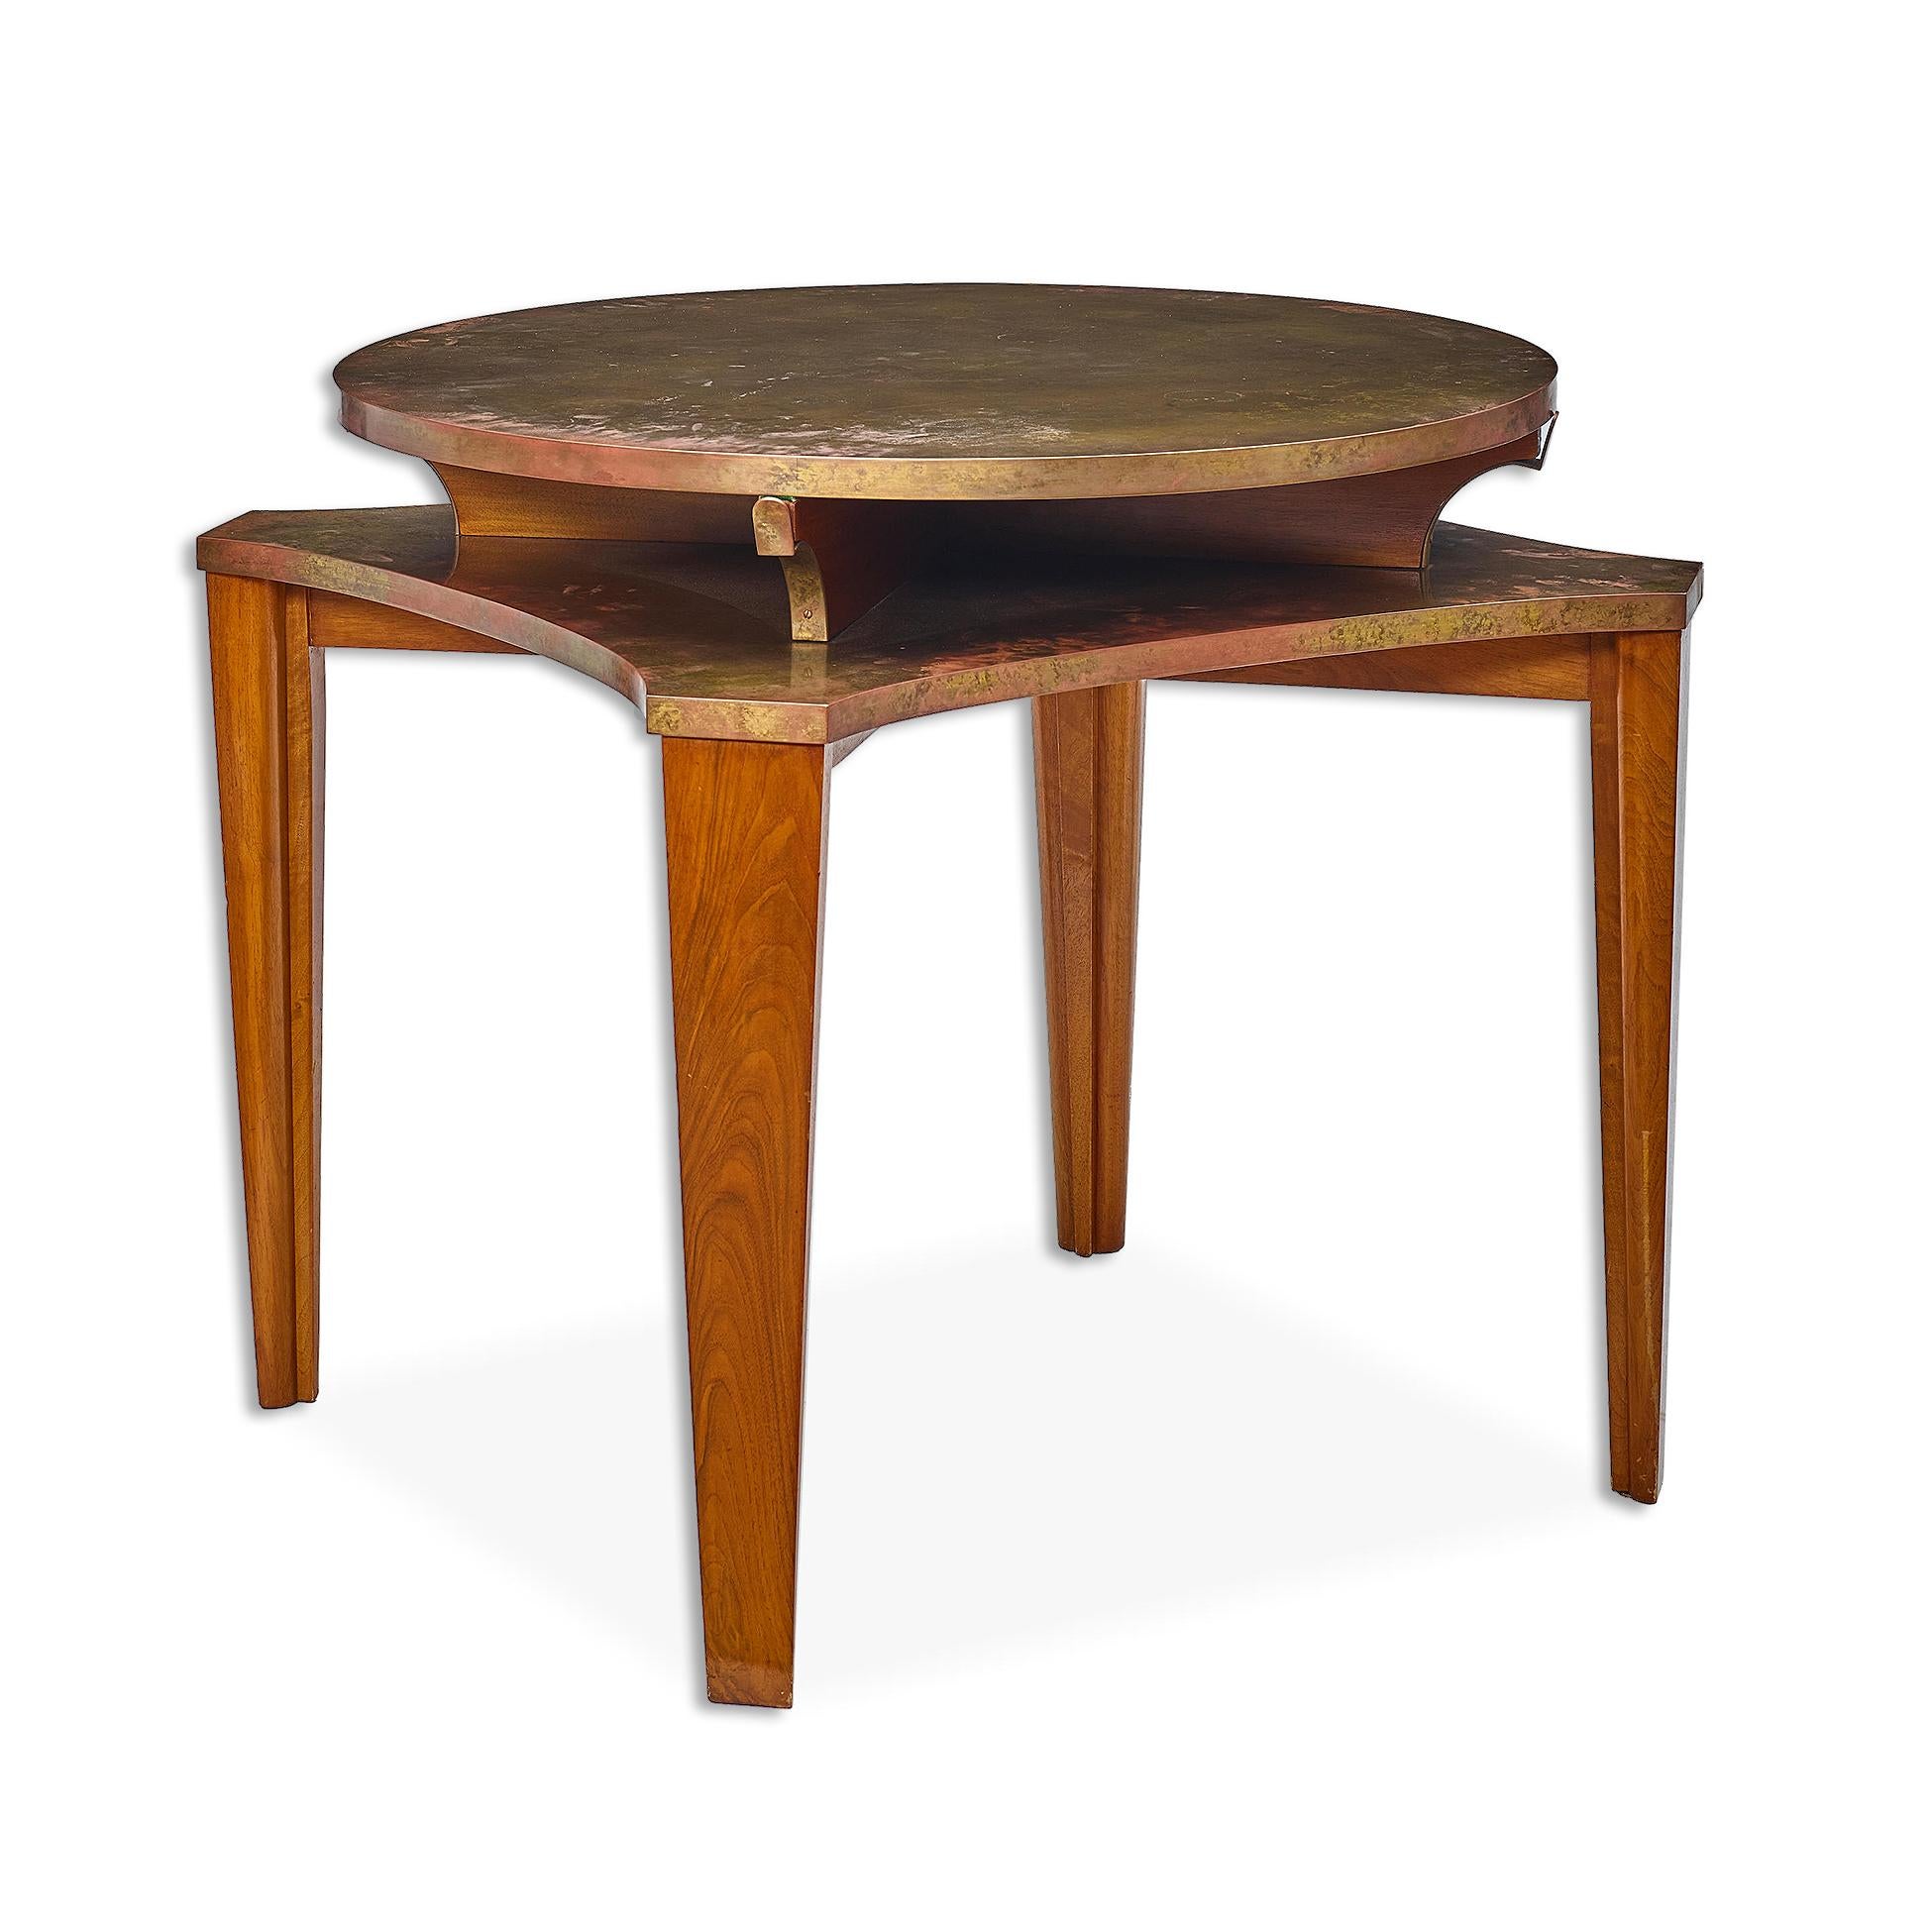 Eugene PRINTZ (1889-1948)
Exceptional bridge table in Rosewood with a removable and reversible superior top, covered with a plate of patinated brass and held by fin shaped supports, and standing on an intercalary top also covered in Oxidized